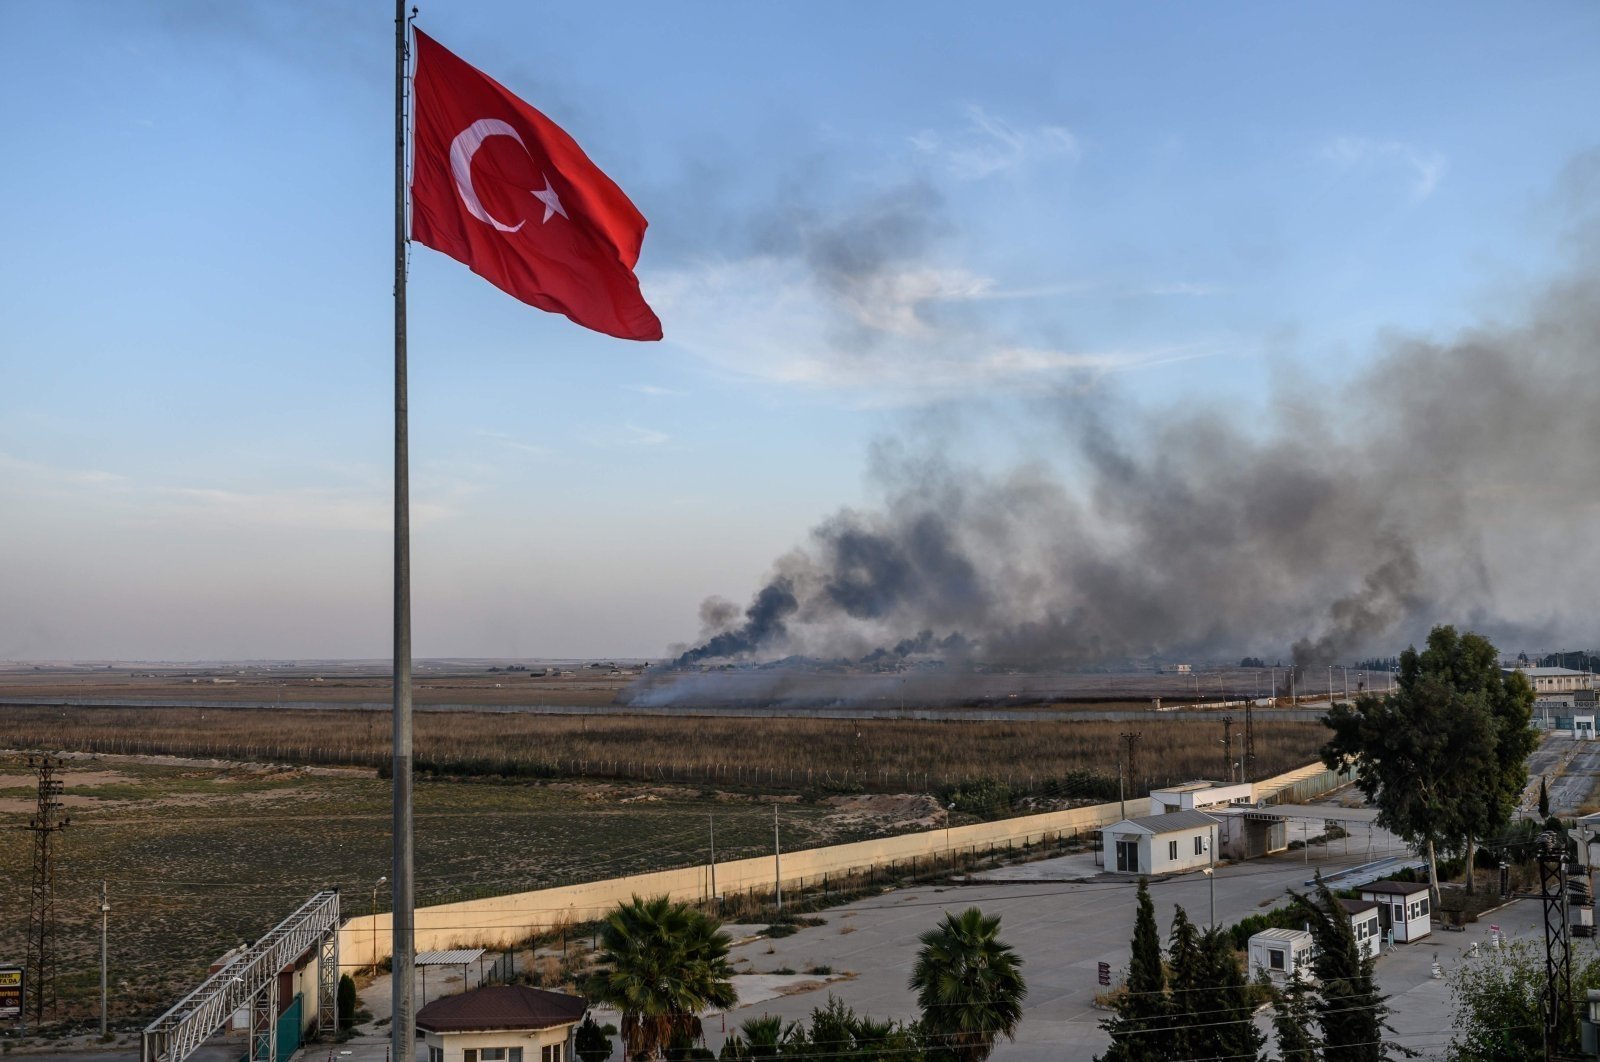 Smoke rises from the Syrian town of Tal Abyad, in a picture taken from the Turkish side of the border where the Turkish flag is seen near Akçakale, Oct. 10, 2019. (AFP File Photo)